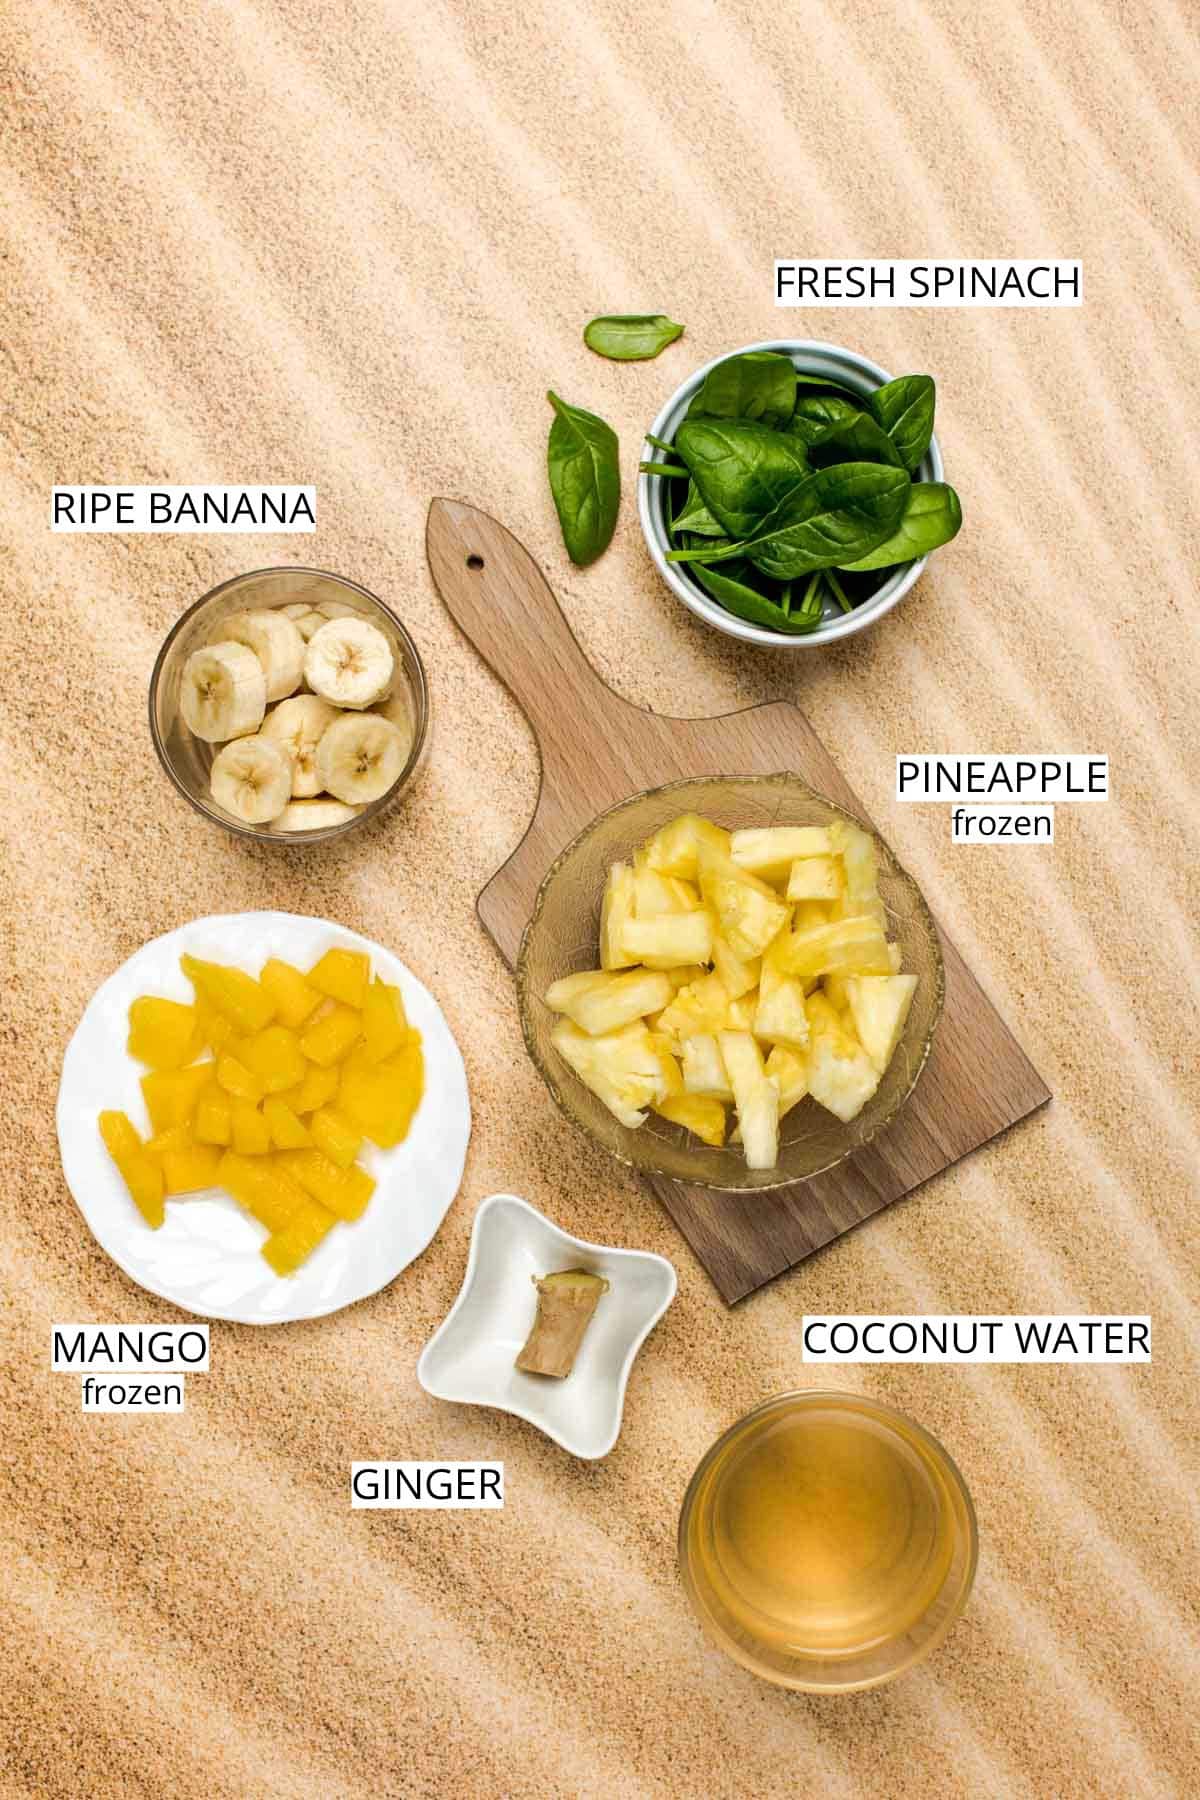 All ingredients needed to make a green smoothie laid out on a surface.